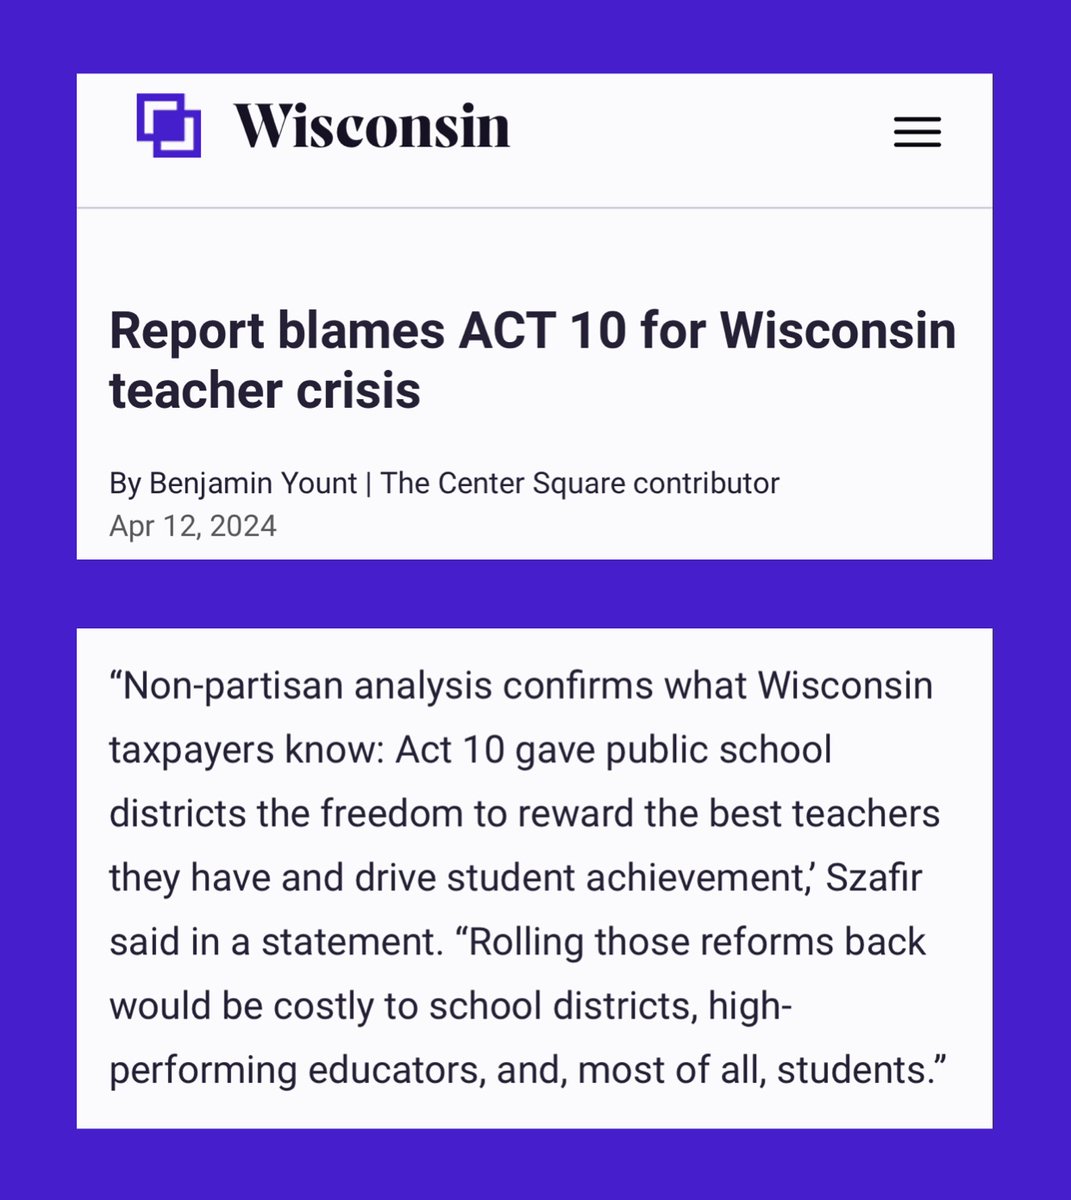 ICYMI: Research shows that Act 10 is a win-win for Wisconsin kids and Wisconsin taxpayers. thecentersquare.com/wisconsin/arti…